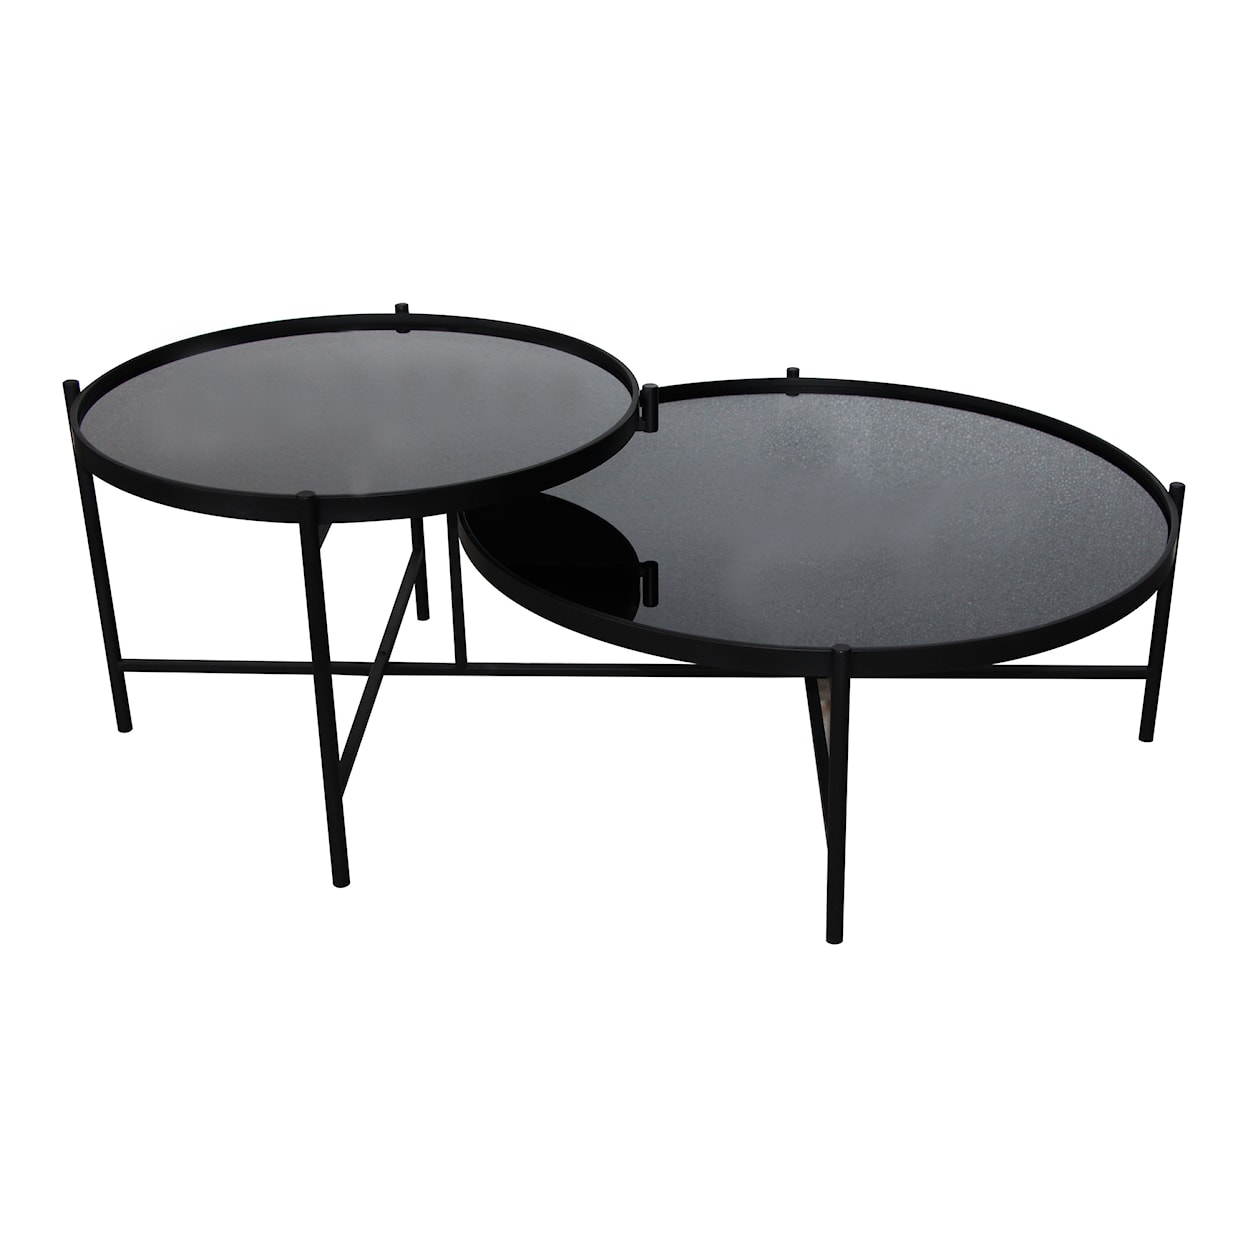 Moe's Home Collection Eclipse Eclipse Coffee Table